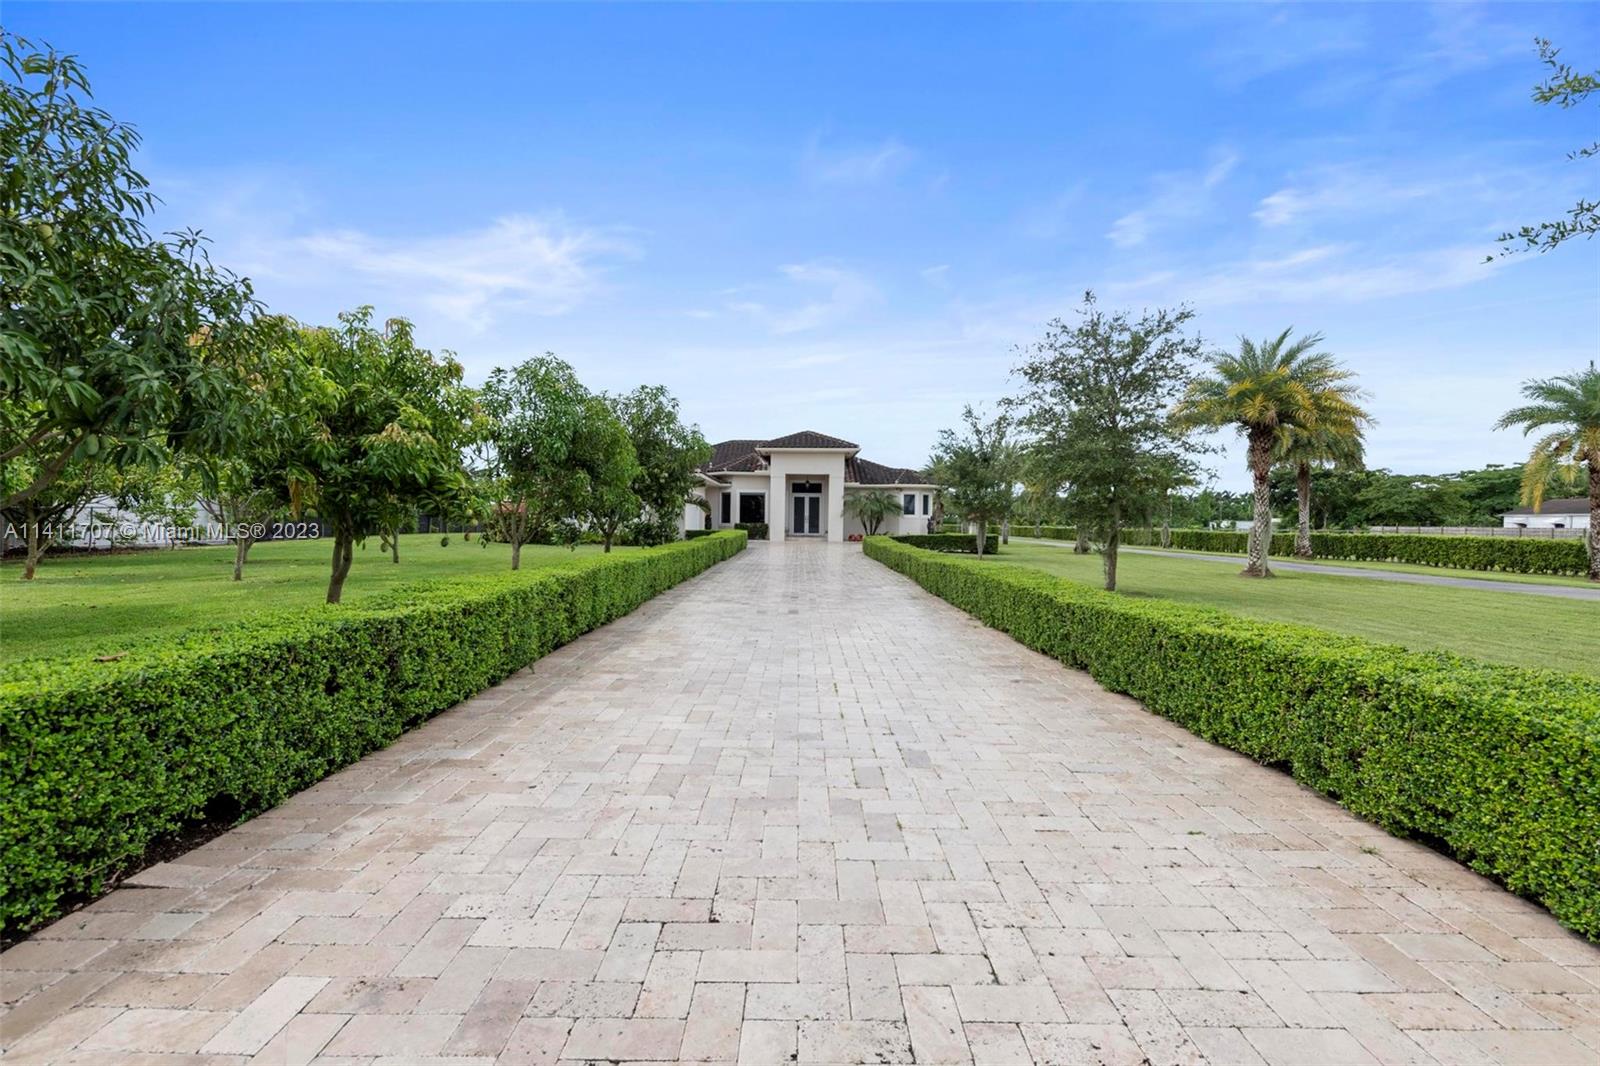 First Class Equestrian Estate in Redland built in 2016. 3,690 Sqft home on 2.42 Acres w/ Guest house. No expense spared from the smart house to the stable area. Spacious master suite, 3 Beds/3.5 Baths. Too many custom upgrades to include here, open floor plan, gourmet kitchen w/ high end kitchen appliances, quartz counters, island, high end cabinetry, custom closets. Quality surround sound system, brand new sec system W/ CCTV and 23 surveillance cams, exterior lighting, impact windows and doors, full power generator, new water softener, resort style heated pool w/ Jacuzzi waterfall, 3 wells, 2 driveways, 2 electric gate, horse stables, 4 stalls each w/their owned sanded paddocks, fans & spray system, green grass/sand arena. Fully fenced w/lush landscaping. Seller will entertain all offers!